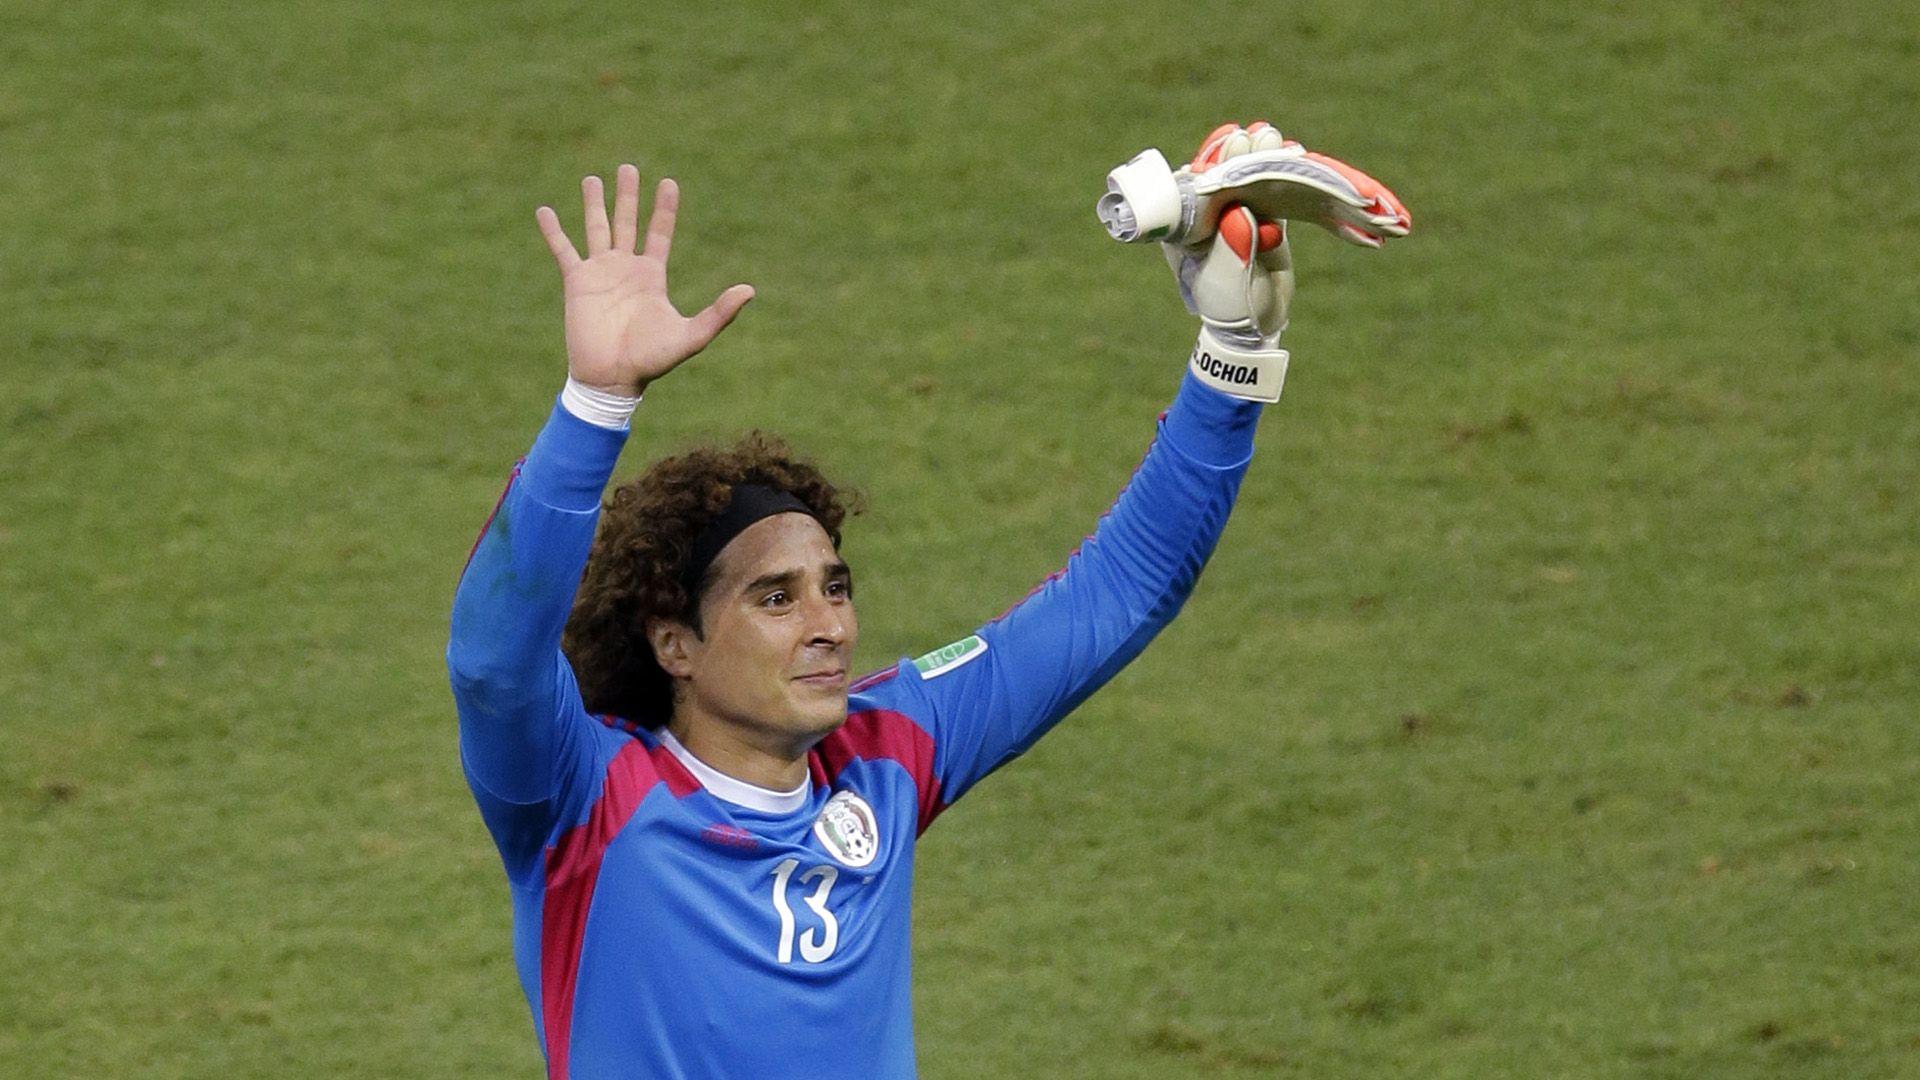 Man of the Match: Guillermo Ochoa stars for Mexico against Brazil